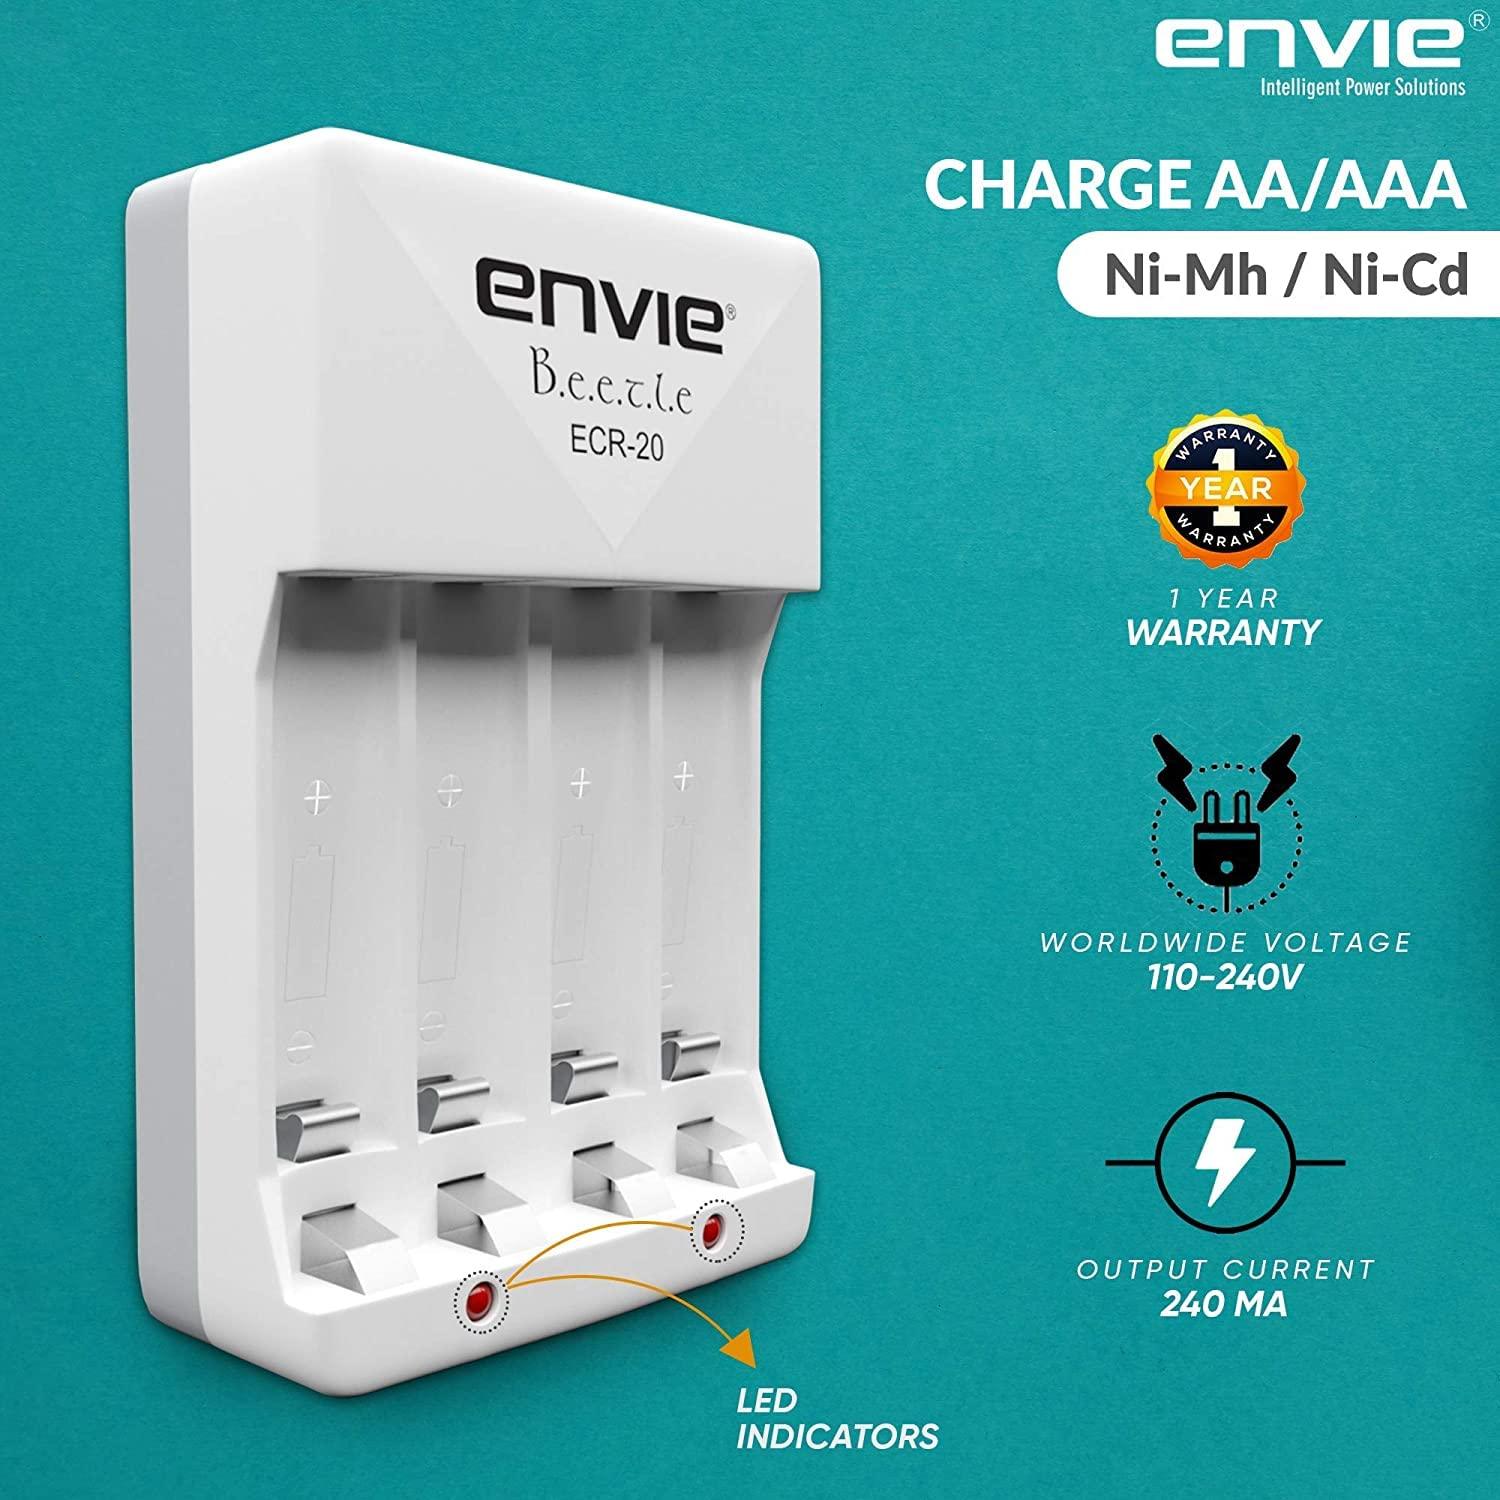 ENVIE (ECR2028002PL) High Speed Wall Plug Charger ECR 20 for AA & AAA Ni-mh/Ni-cd Rechargeable Batteries | 2000MA Output Current | with 2 AA2800 Ni-mh Batteries (ECR2028002PL) - Digitek